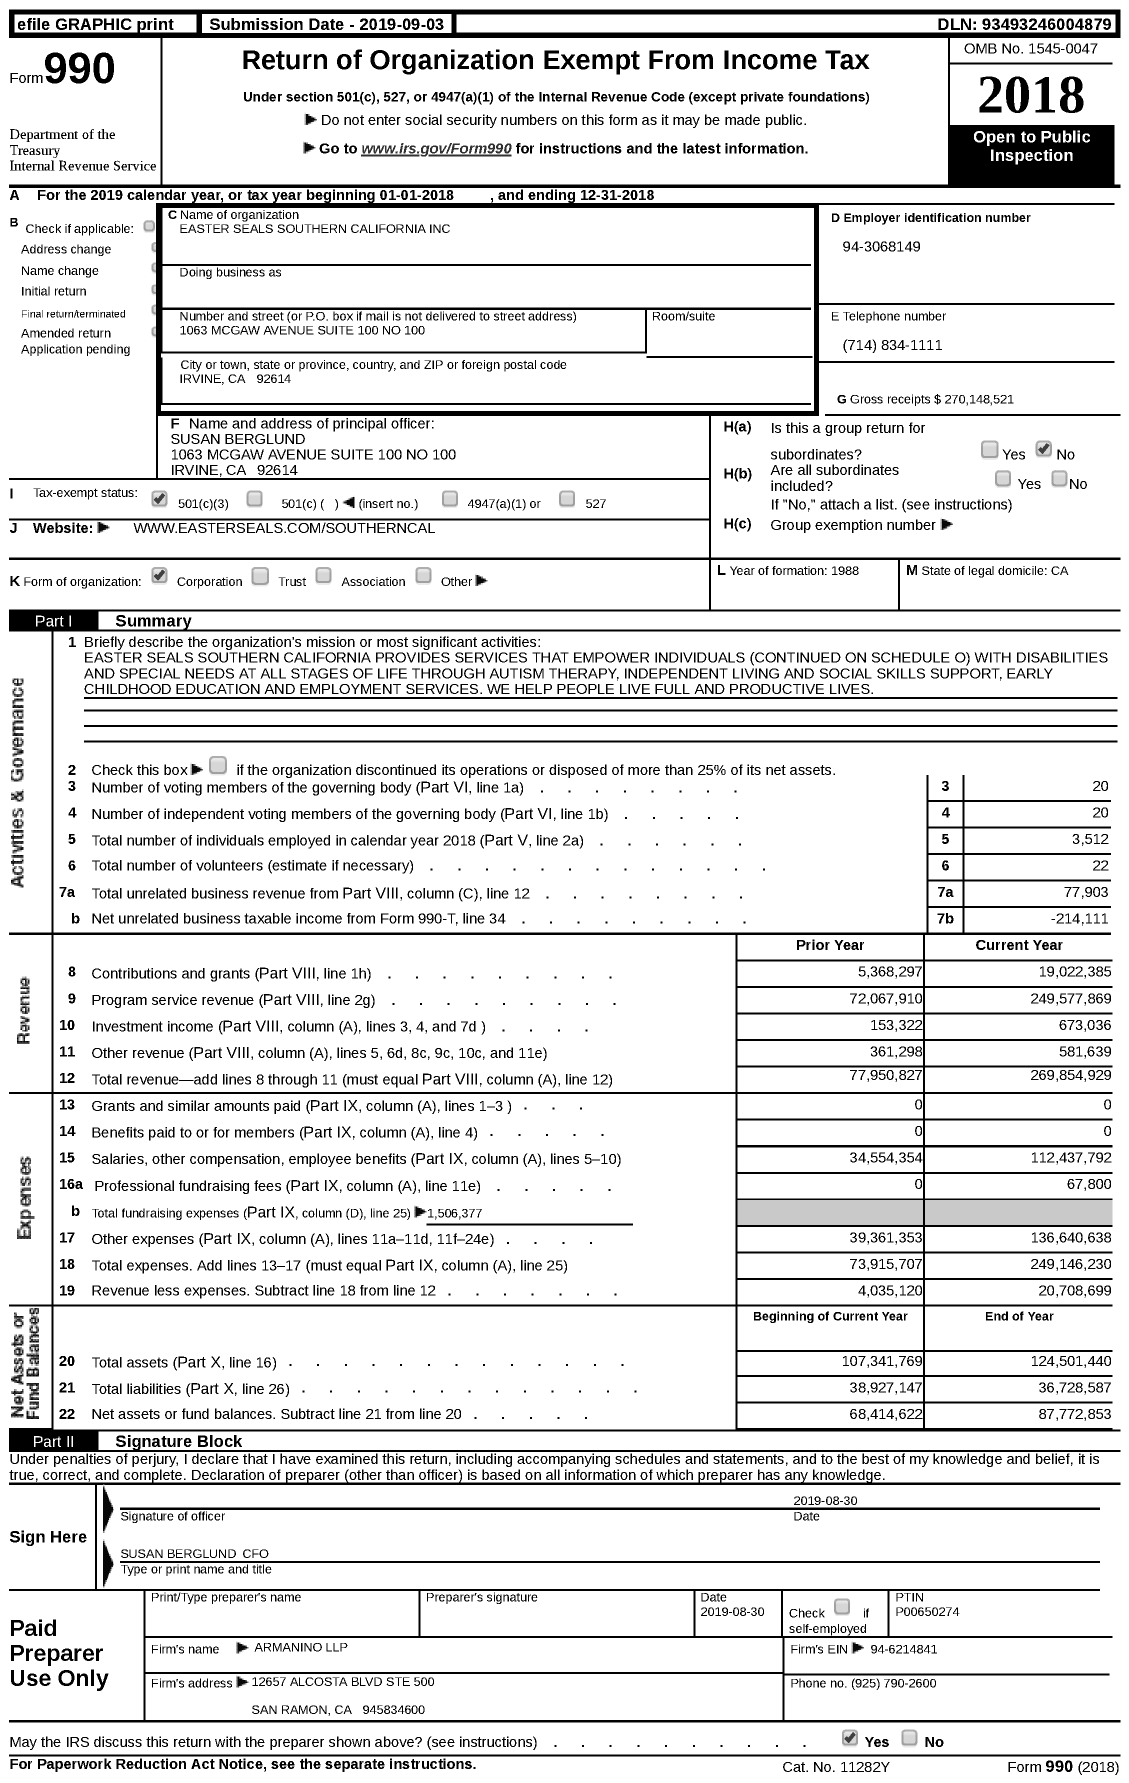 Image of first page of 2018 Form 990 for Easterseals Southern California